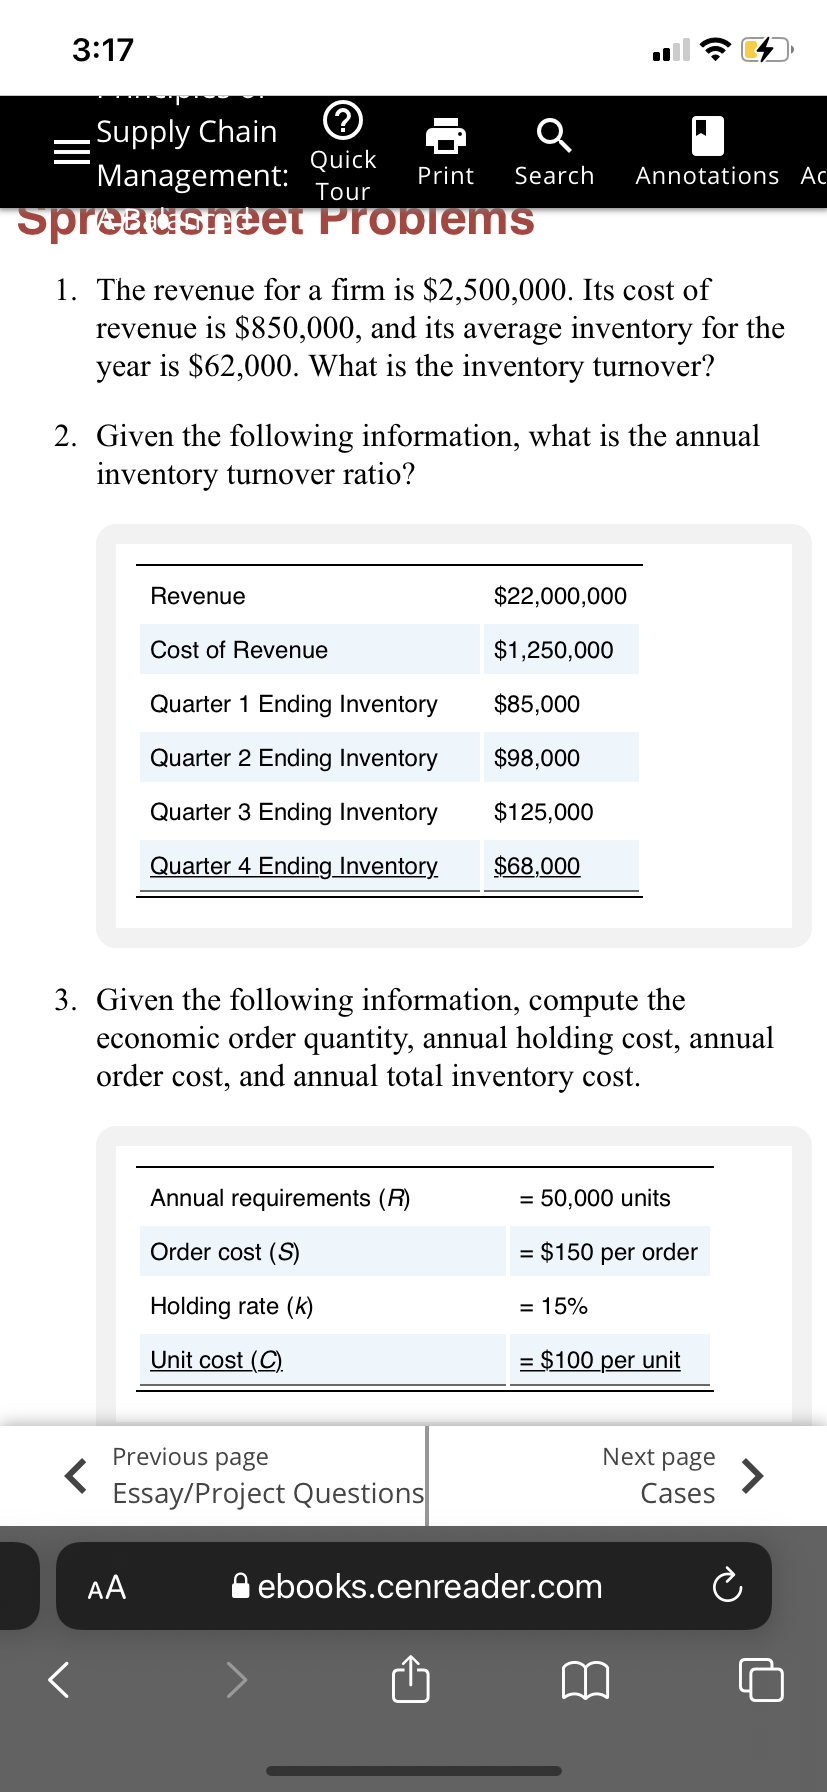 3:17
Supply Chain
Management:
Quick
Print
Search
Annotations Ac
Tour
Spreausneet ProblemsS
1. The revenue for a firm is $2,500,000. Its cost of
revenue is $850,000, and its average inventory for the
year is $62,000. What is the inventory turnover?
2. Given the following information, what is the annual
inventory turnover ratio?
Revenue
$22,000,000
Cost of Revenue
$1,250,000
Quarter 1 Ending Inventory
$85,000
Quarter 2 Ending Inventory
$98,000
Quarter 3 Ending Inventory
$125,000
Quarter 4 Ending Inventory
$68,000
3. Given the following information, compute the
economic order quantity, annual holding cost, annual
order cost, and annual total inventory cost.
Annual requirements (R)
= 50,000 units
Order cost (S)
= $150 per order
Holding rate (k)
= 15%
Unit cost (C).
= $100 per unit
Previous page
Next page
Essay/Project Questions
Cases
AA
A ebooks.cenreader.com
